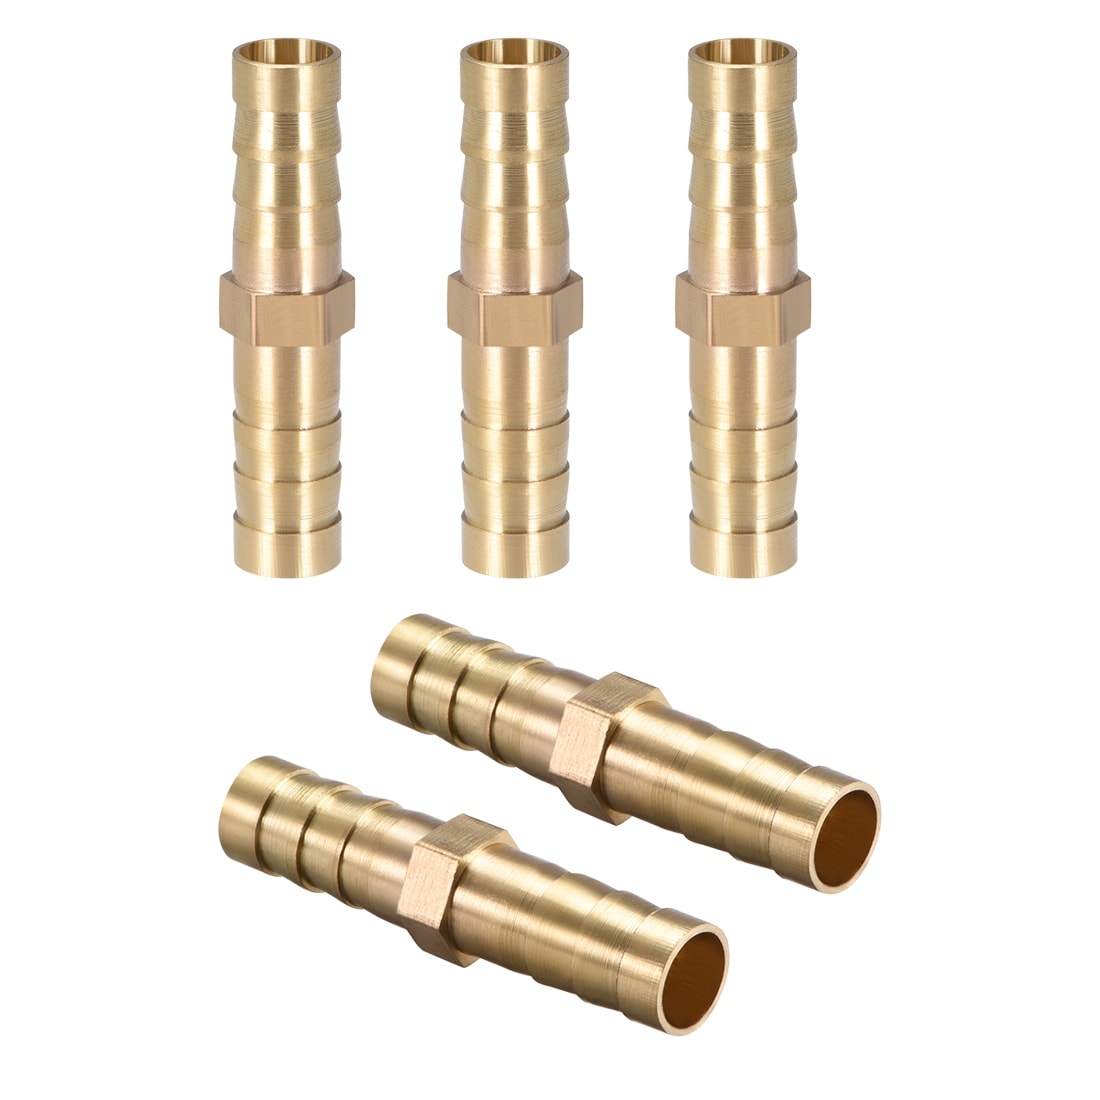 Othmro 8mm or 5/16 inches ID Brass Barb Splicer Fitting,Straight Barb Hose Fitting Air Gas Water Fuel,Gold Tone 2 pcs 